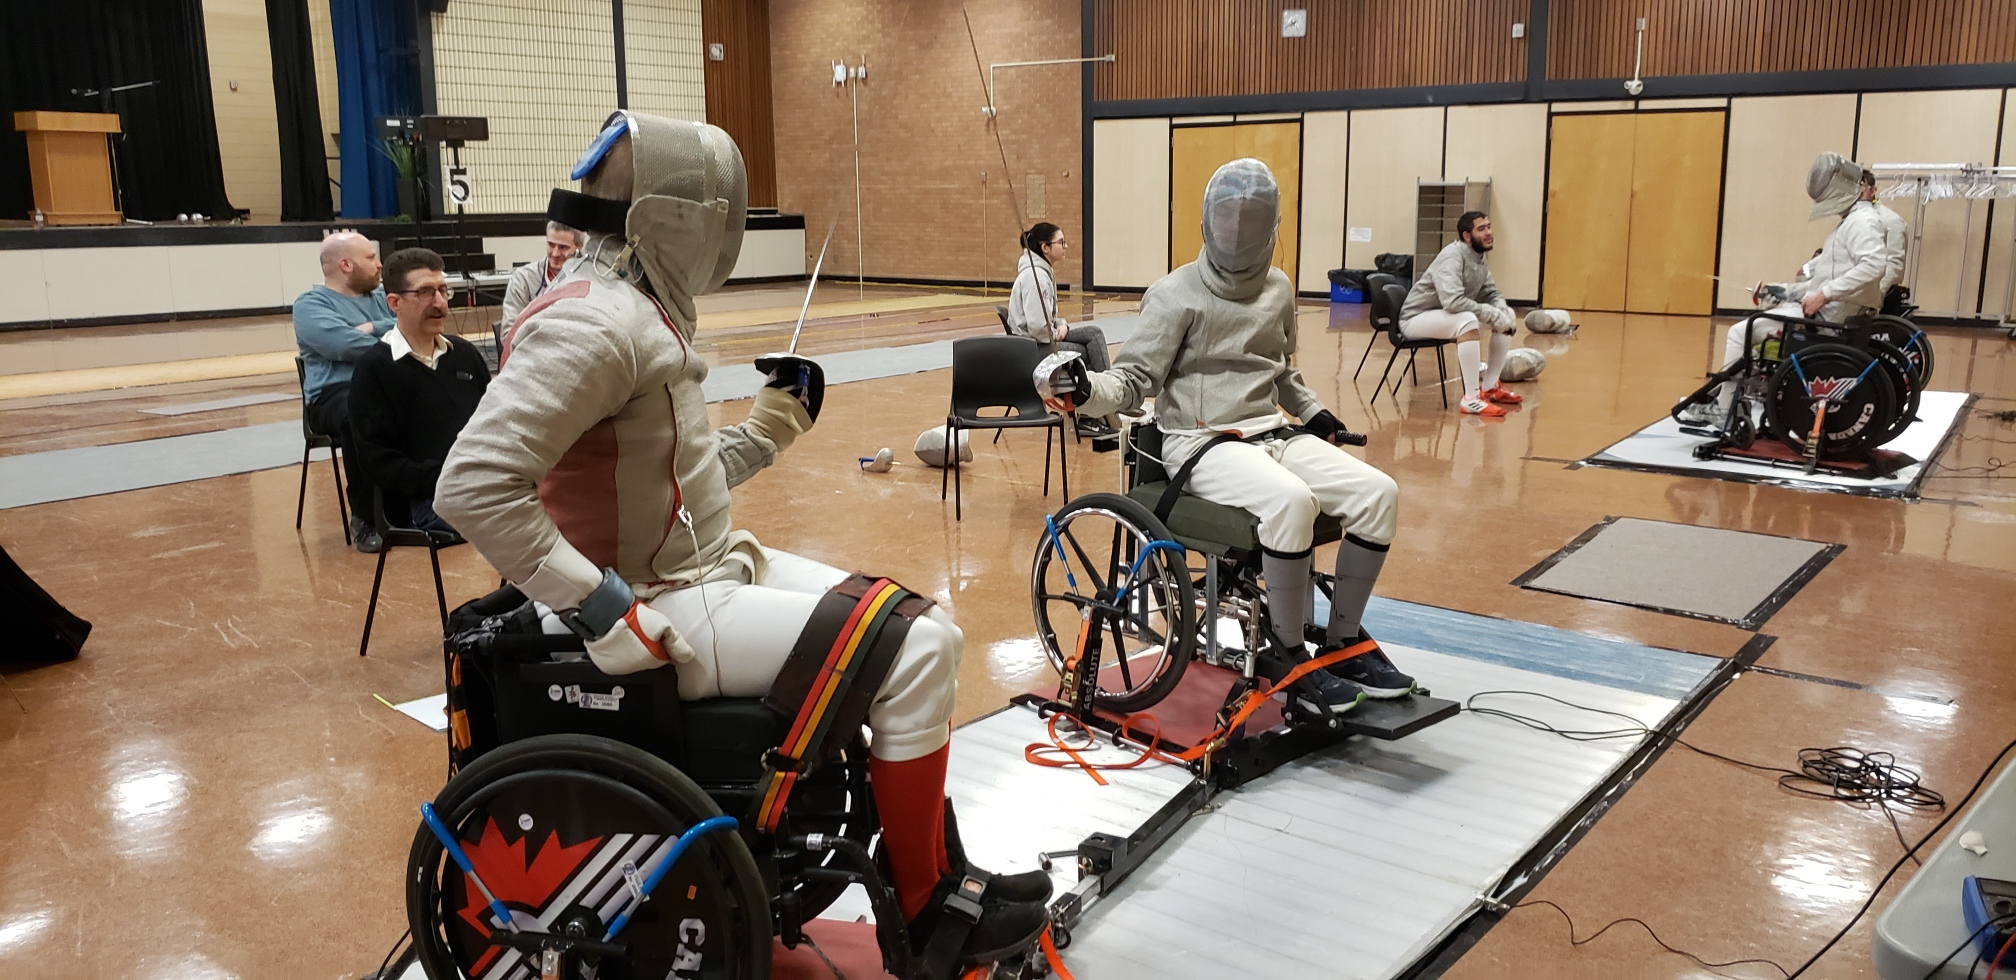 two people fencing in wheelchairs facing each other